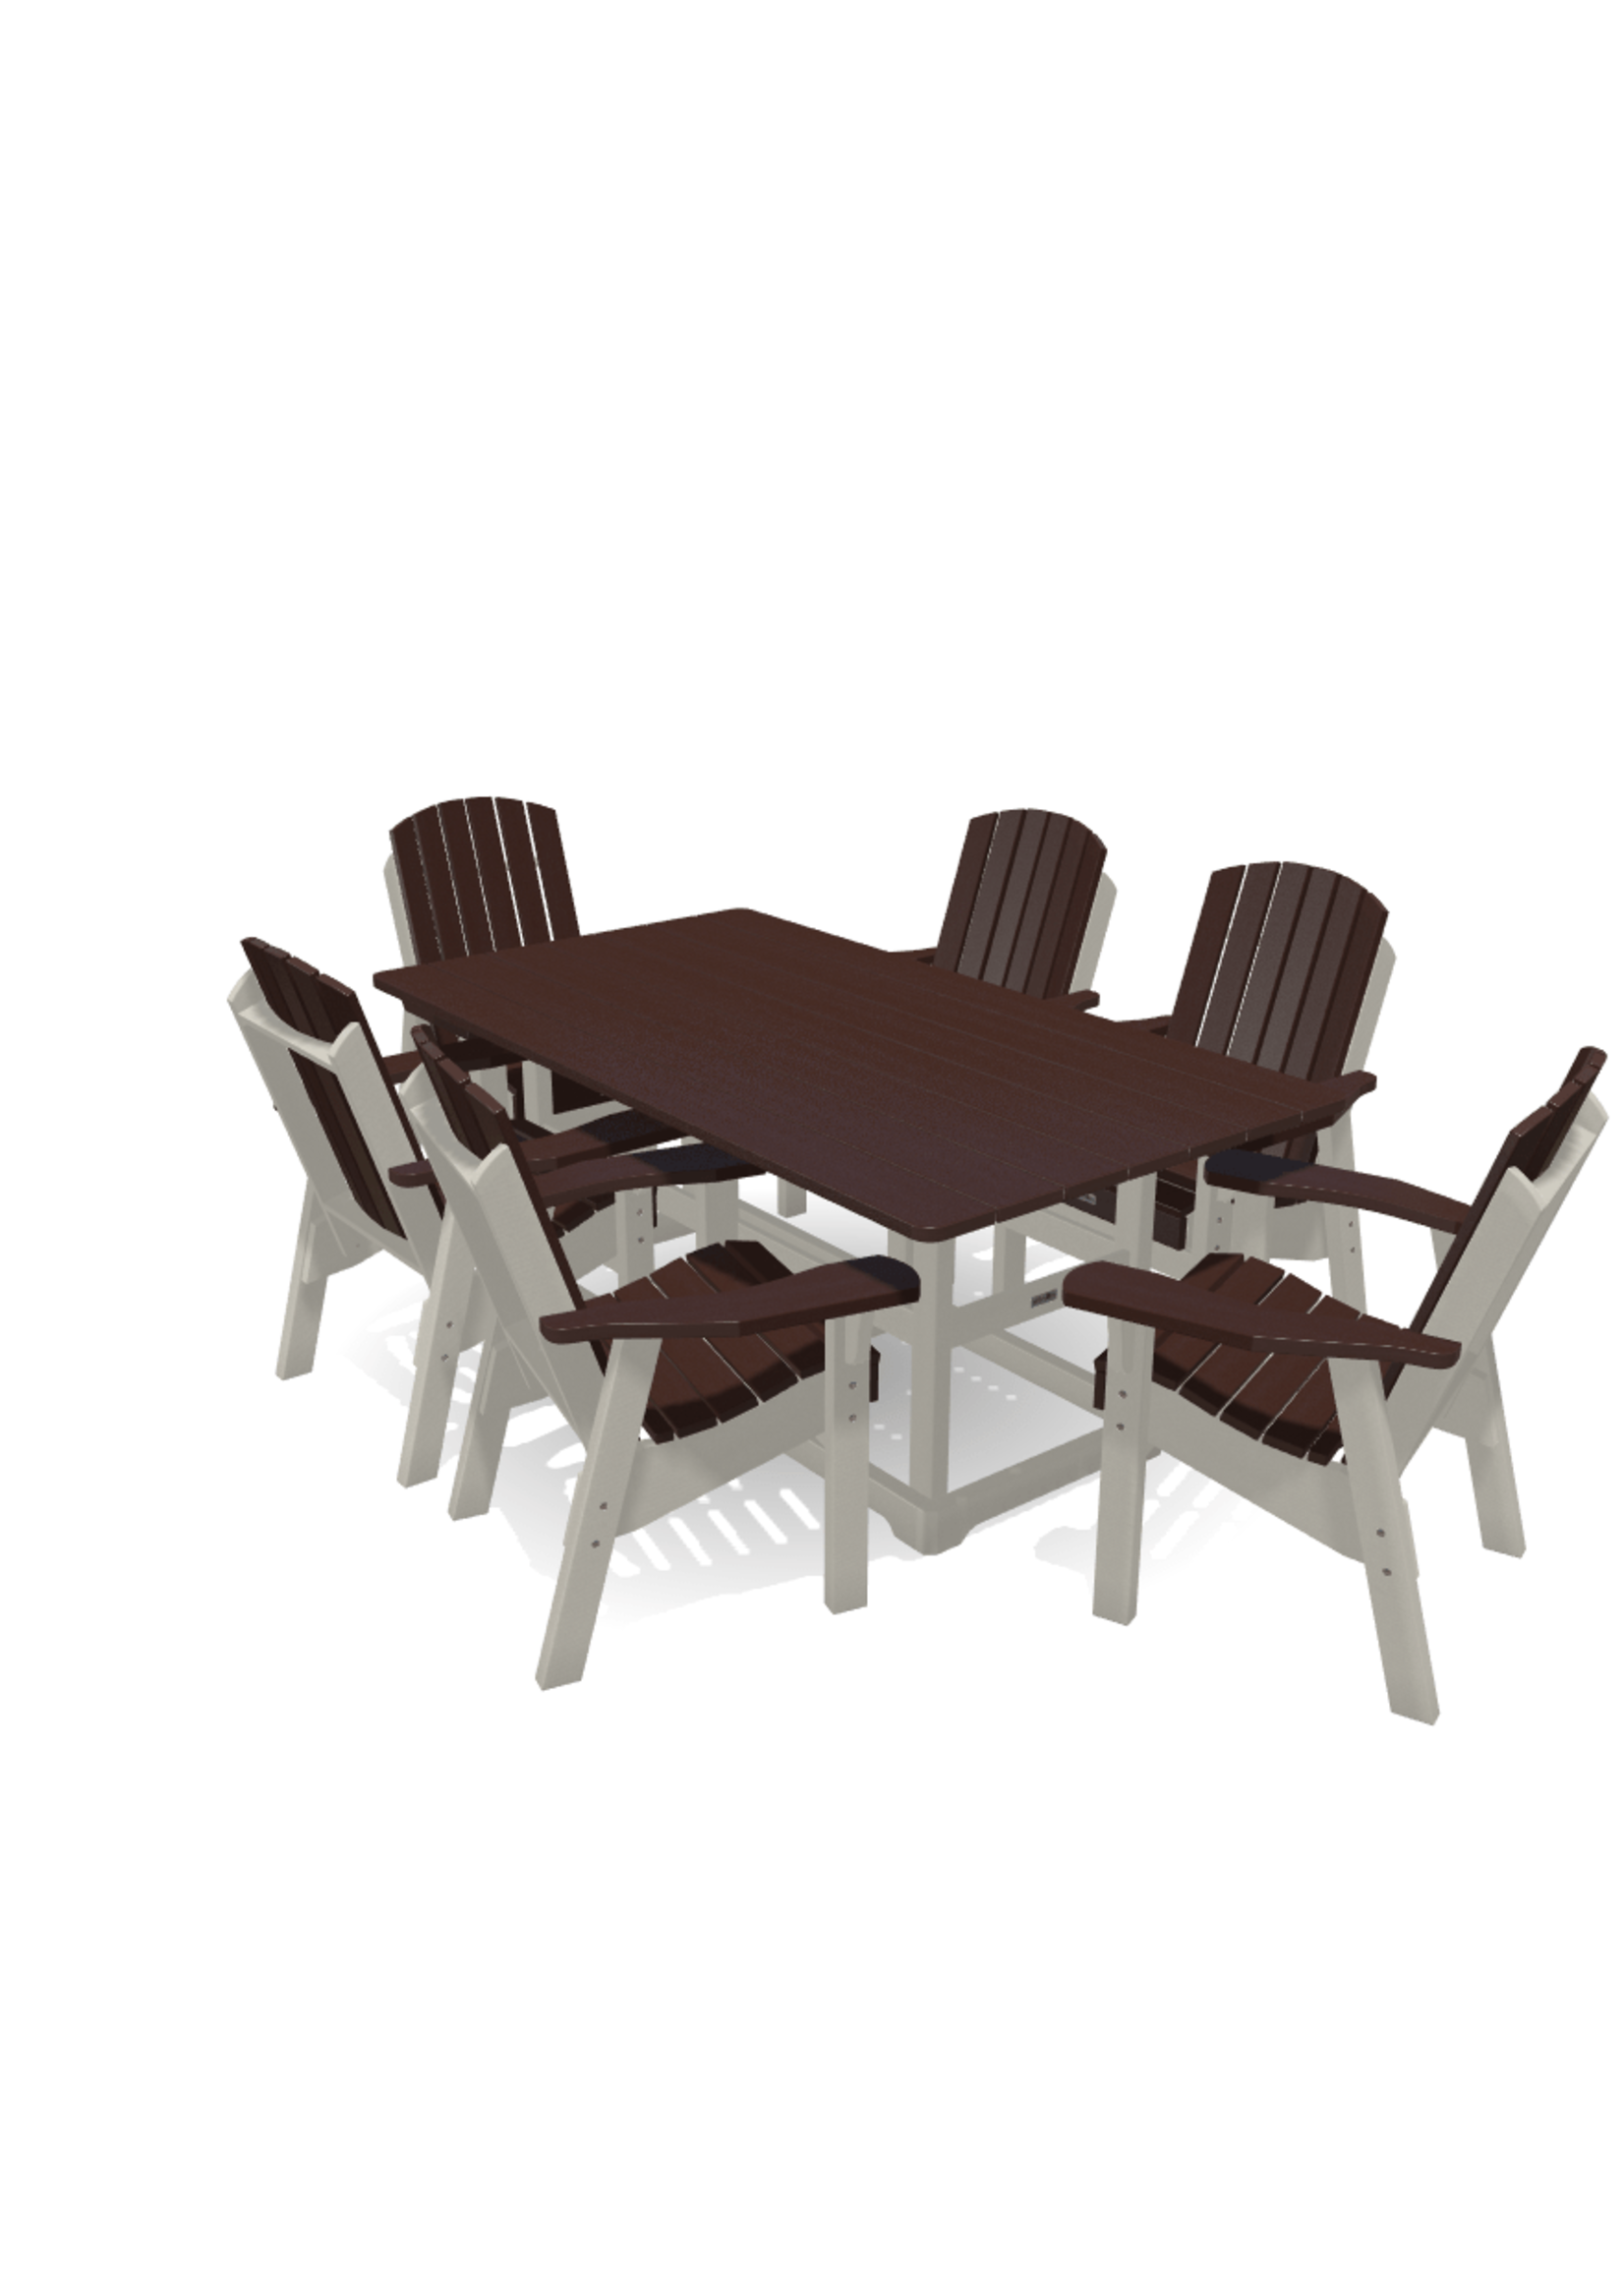 Krahn Dining Deluxe 6' Table w/6 Arm Chairs